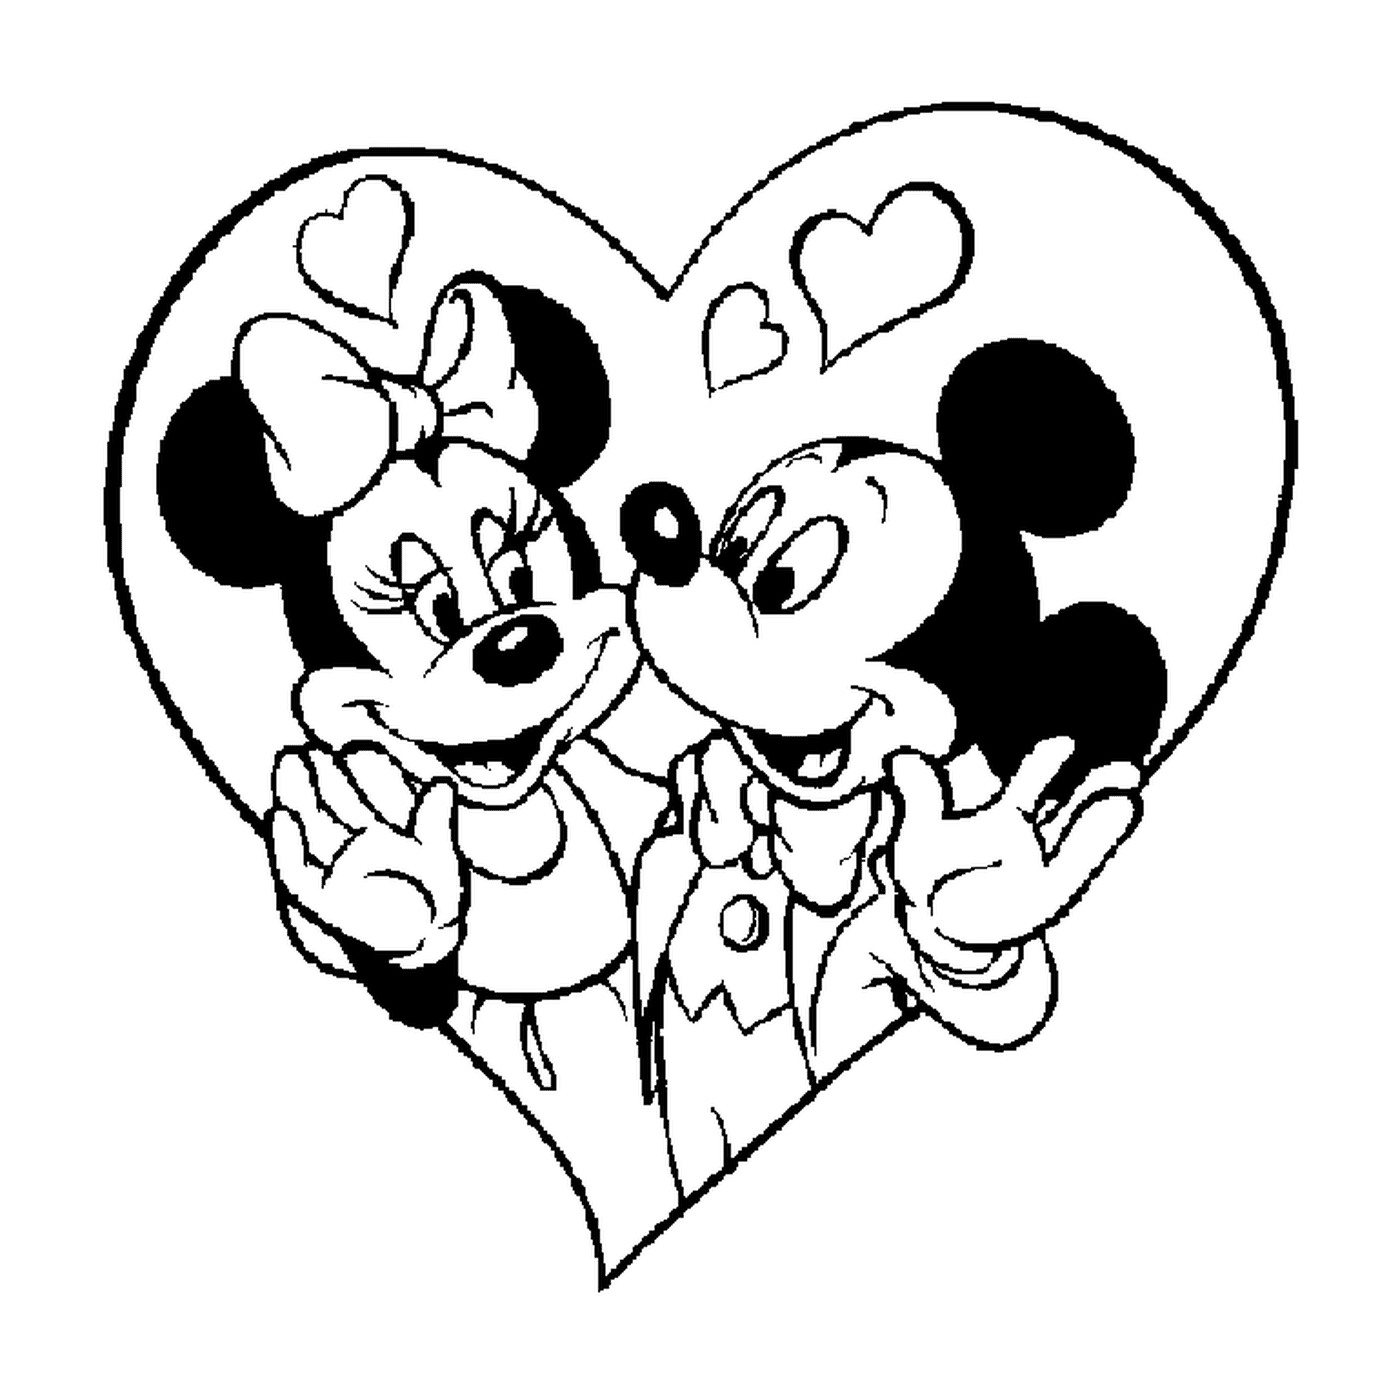  Mickey and Minnie Mouse in a heart 